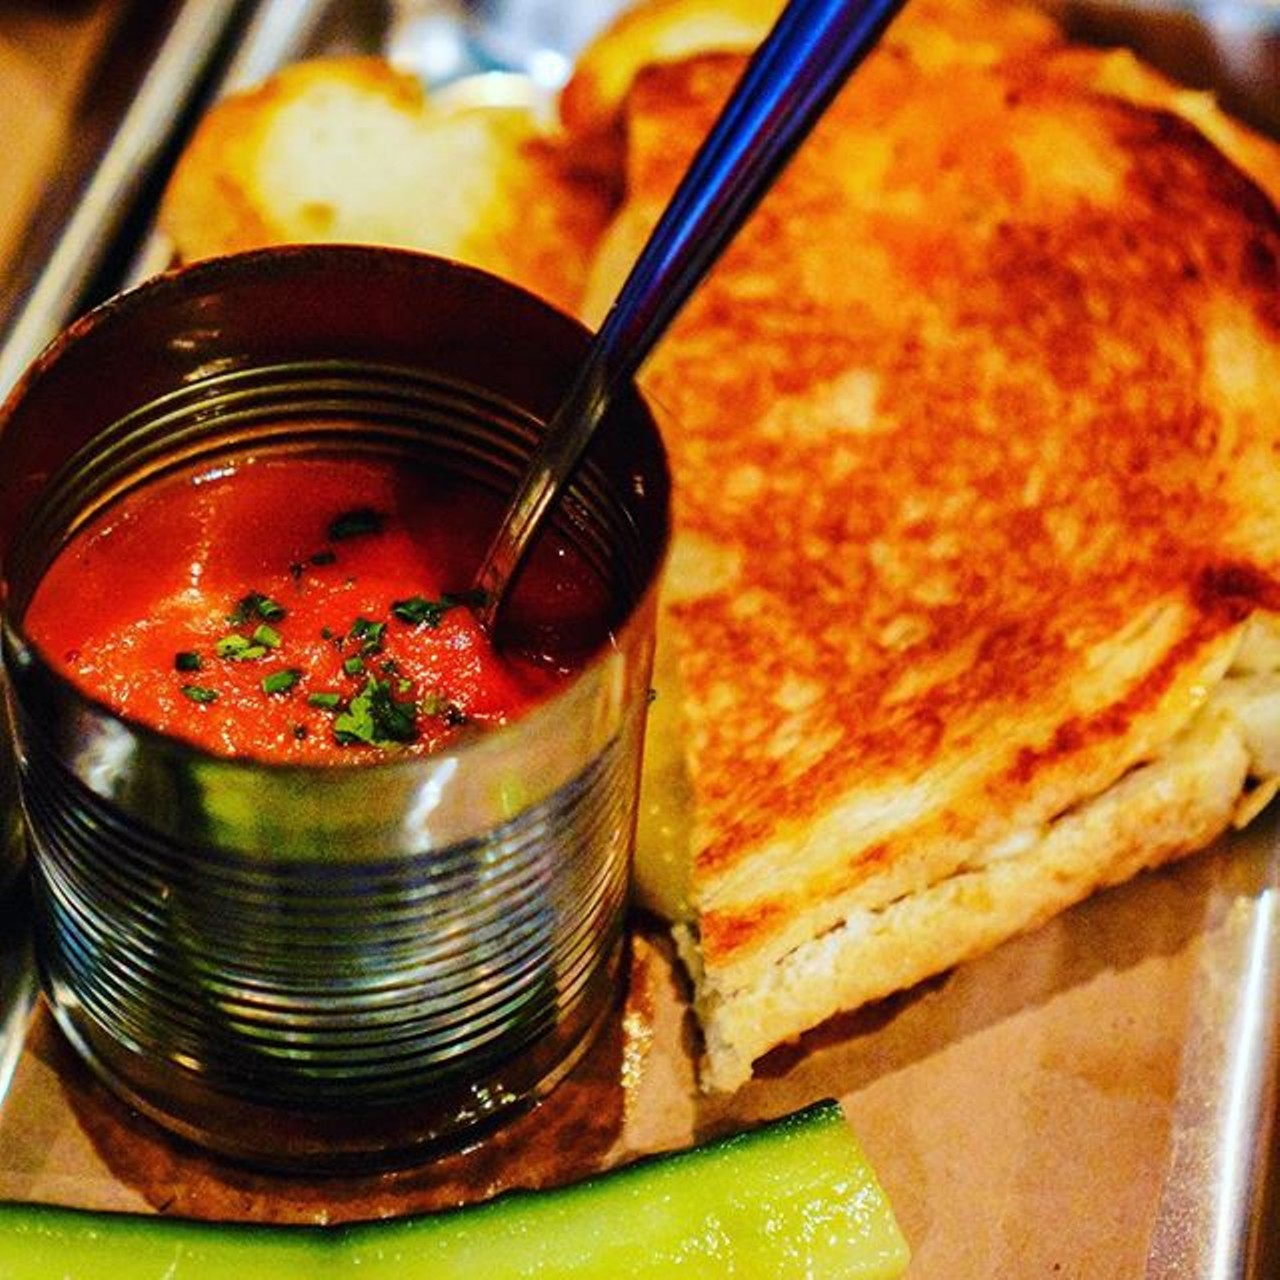 Must try: Classic tomato soup and grilled cheese to take you back to simpler times.